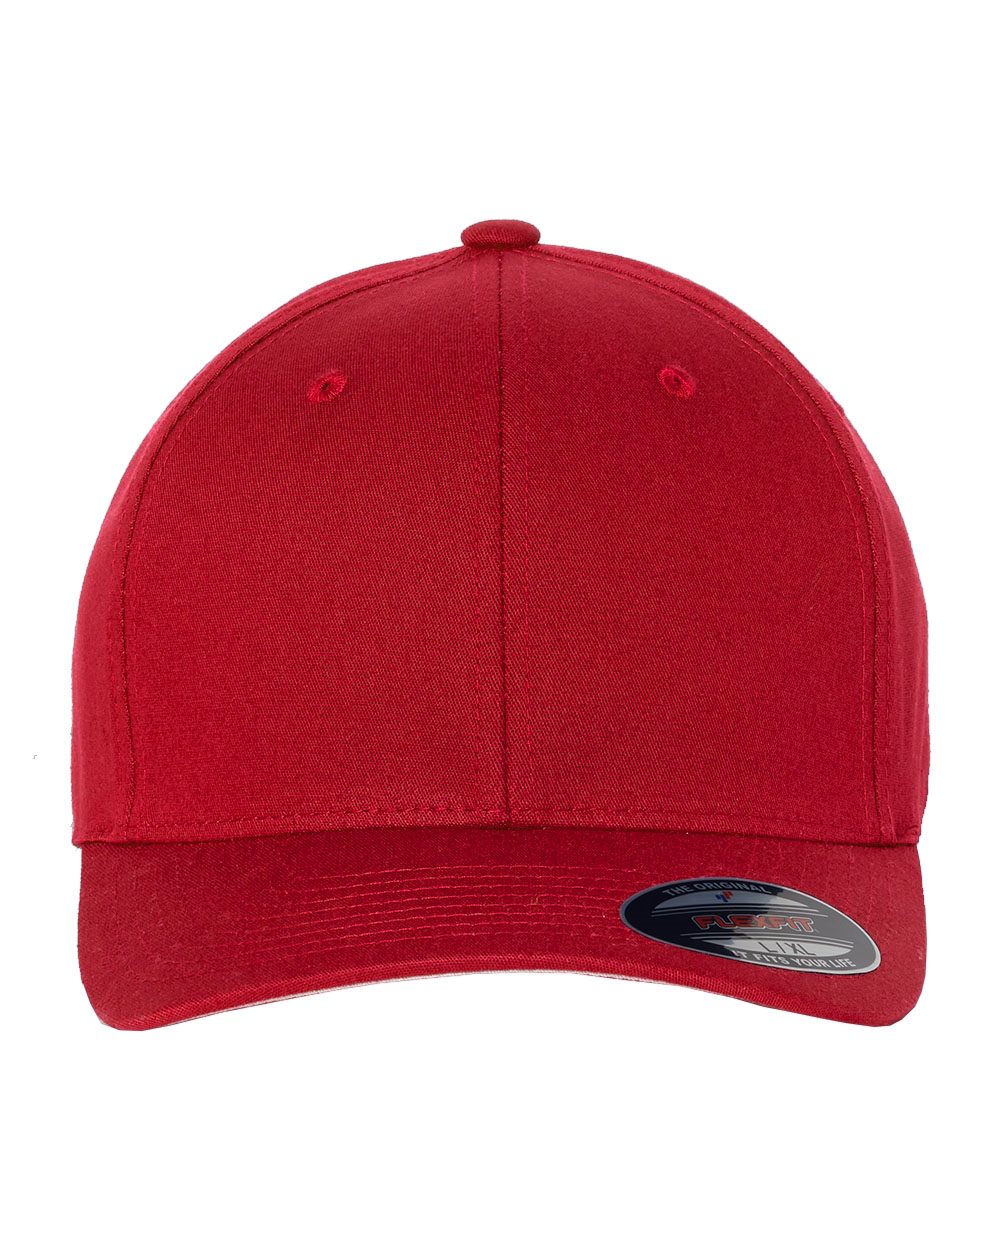 5001 To V-Flexfit® - You Custom Cap Embroidered Cotton Caps - Twill